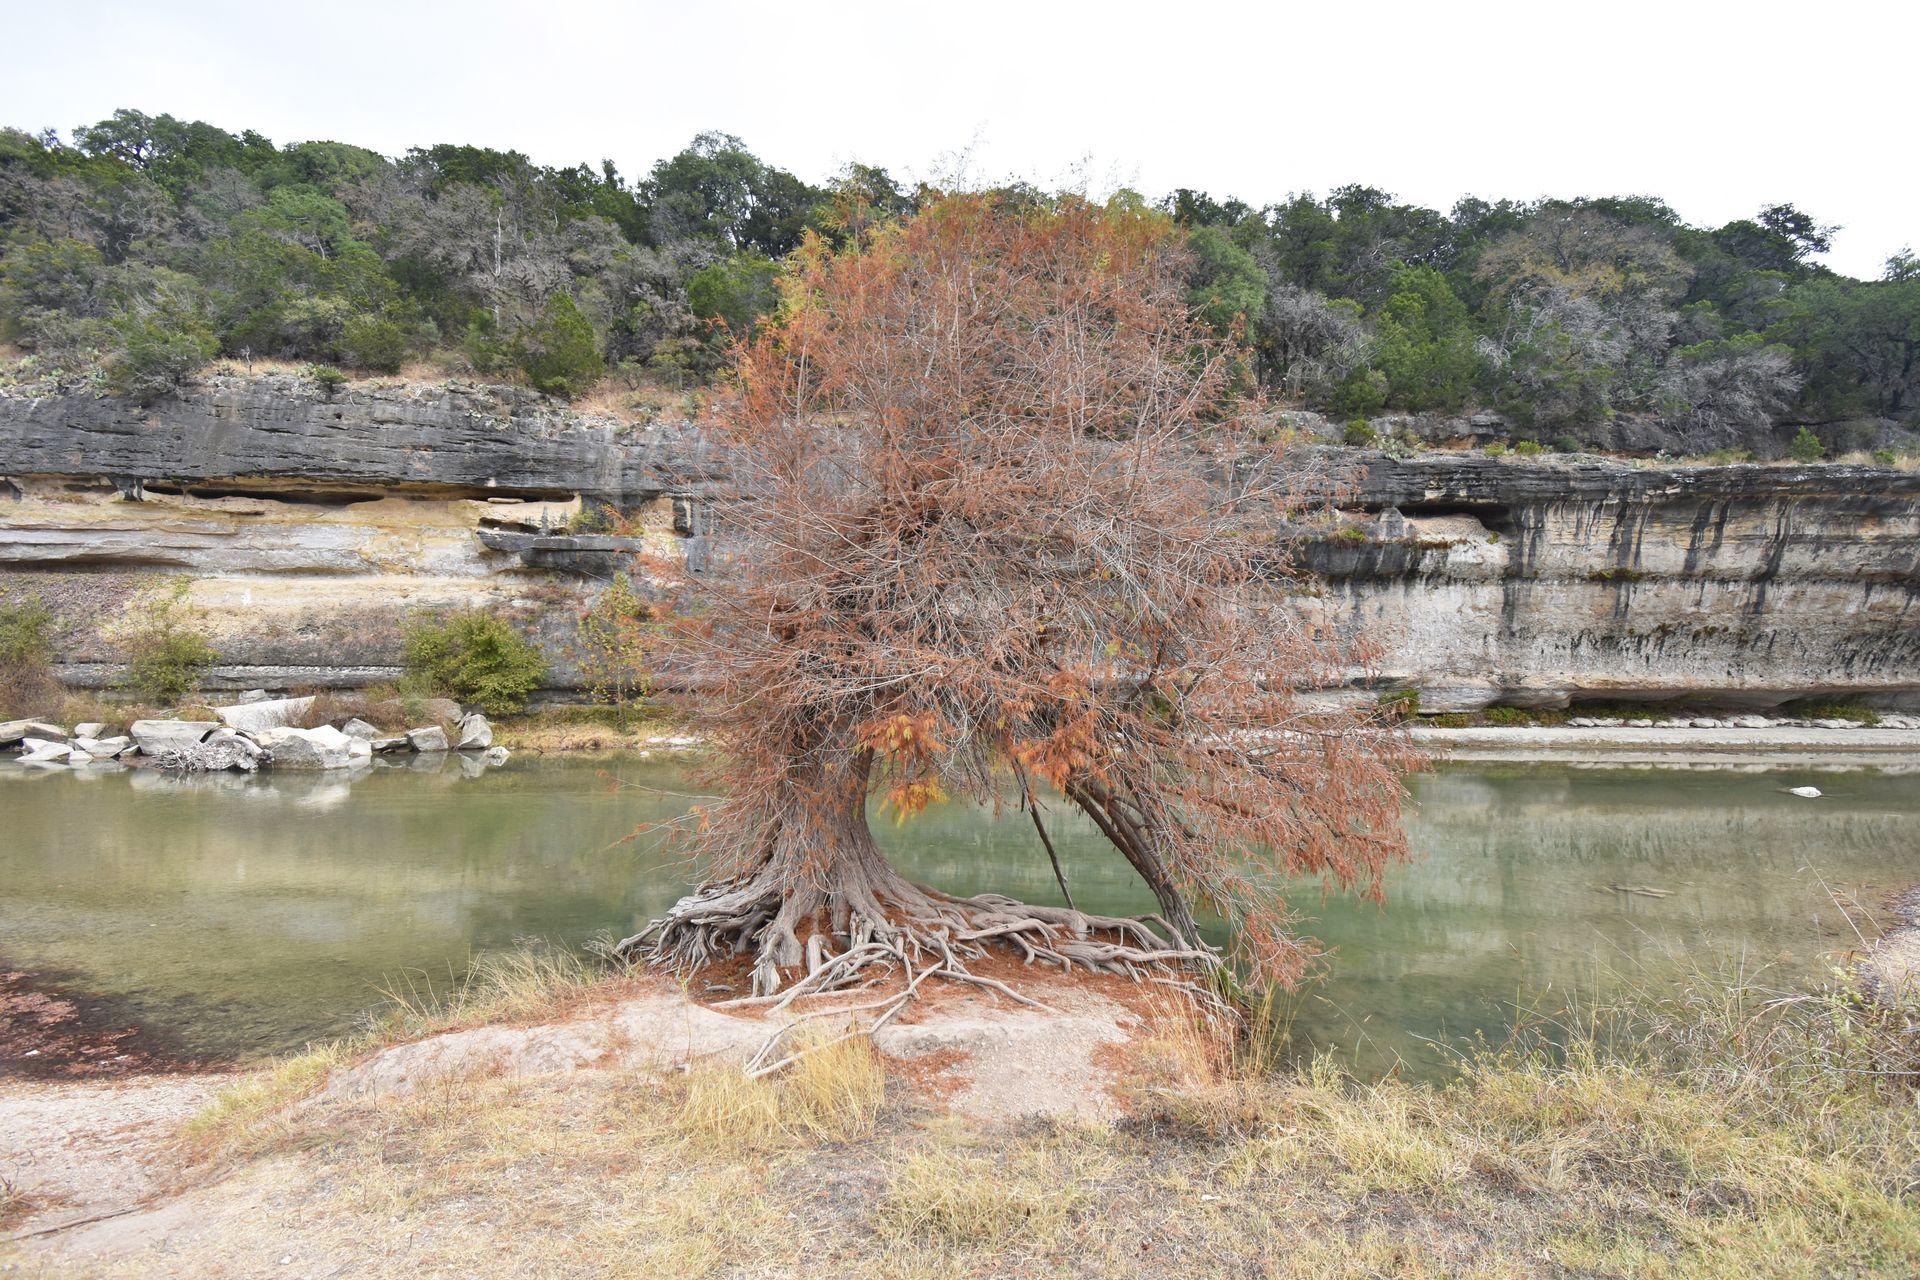 A tree on the edge of the Guadalupe River. There is a rock wall across the river.